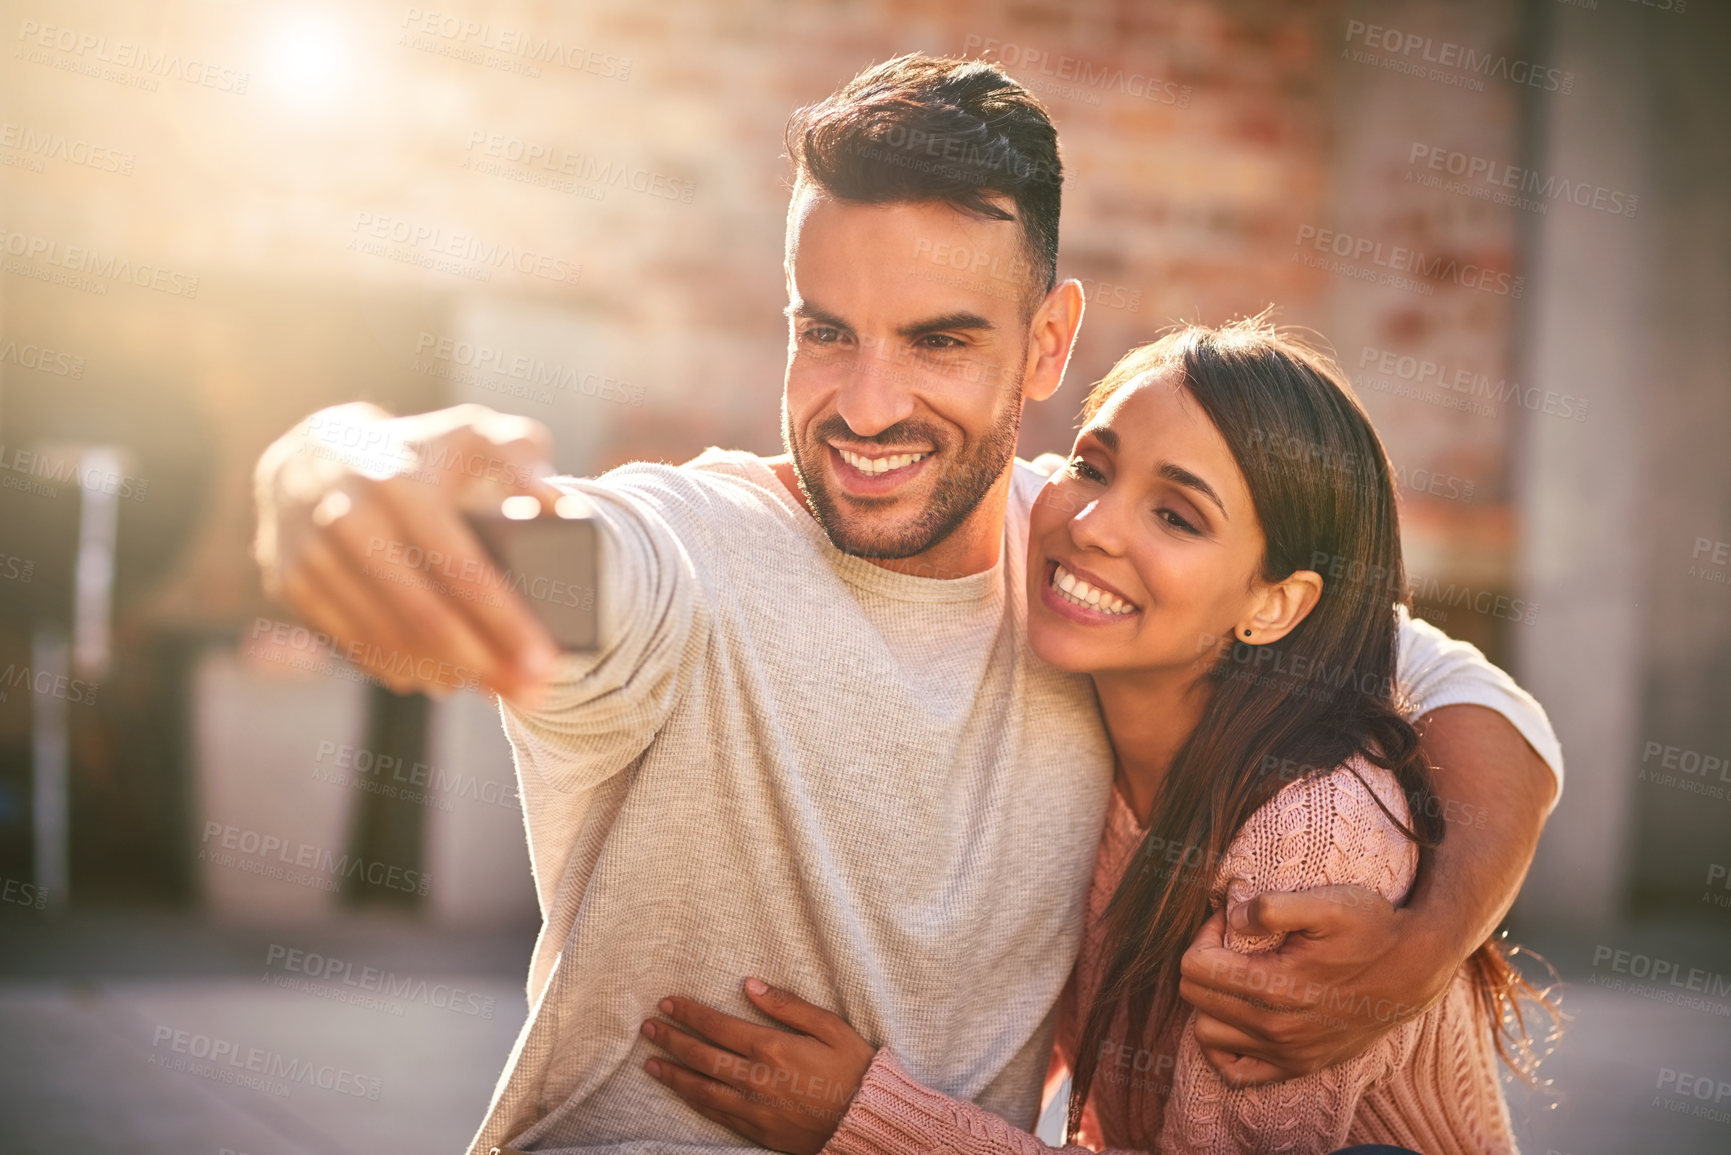 Buy stock photo Shot of a happy young couple taking selfies together outdoors